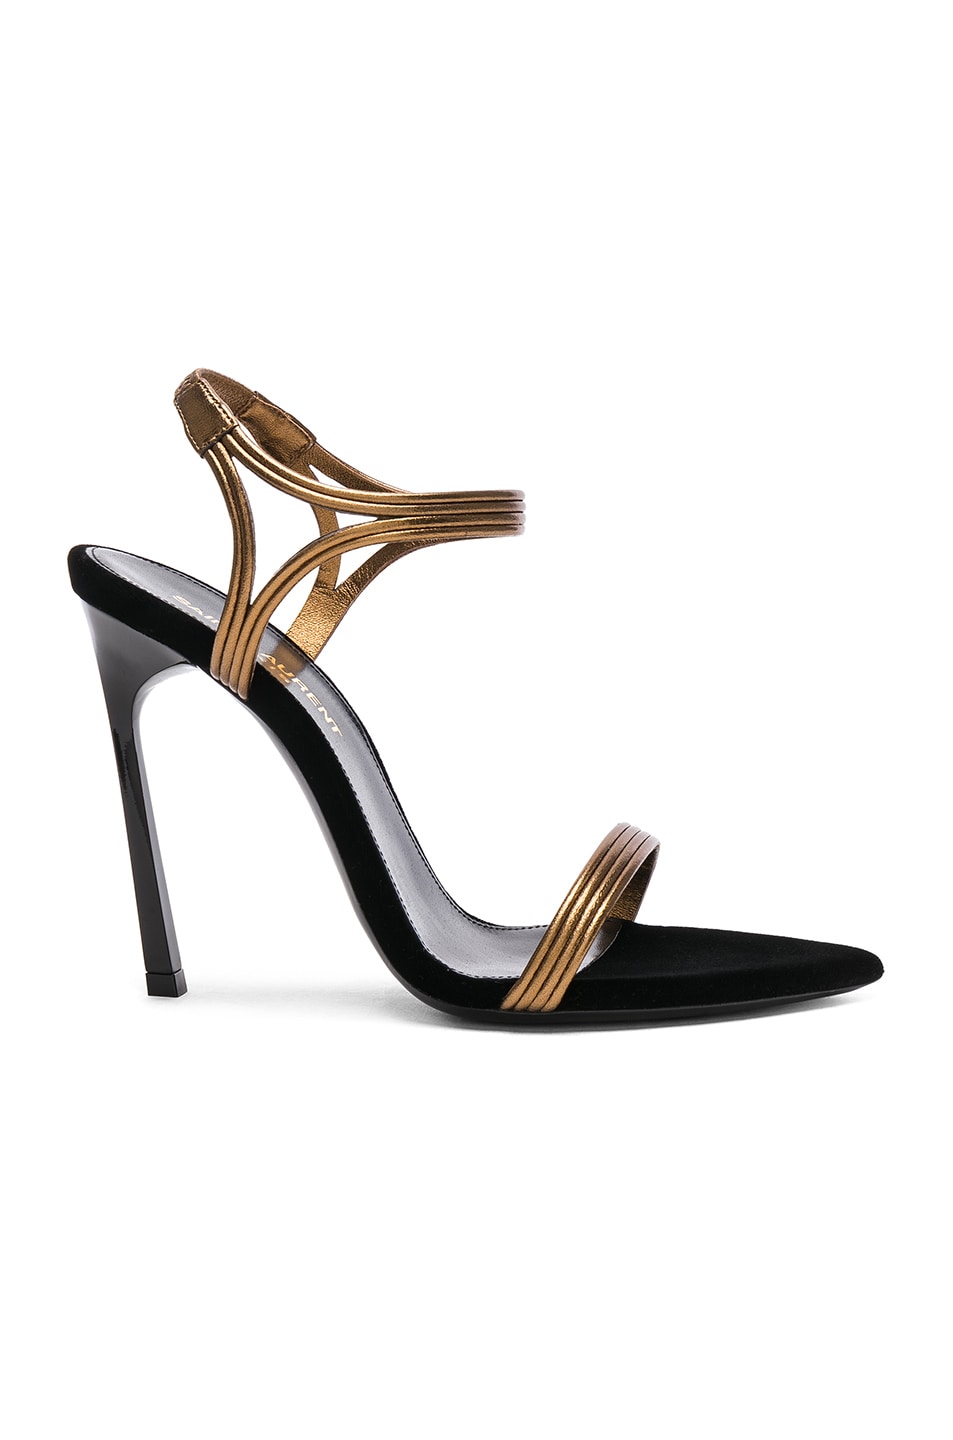 Image 1 of Saint Laurent Talitha Metallic Leather Sandals in Black & Gold